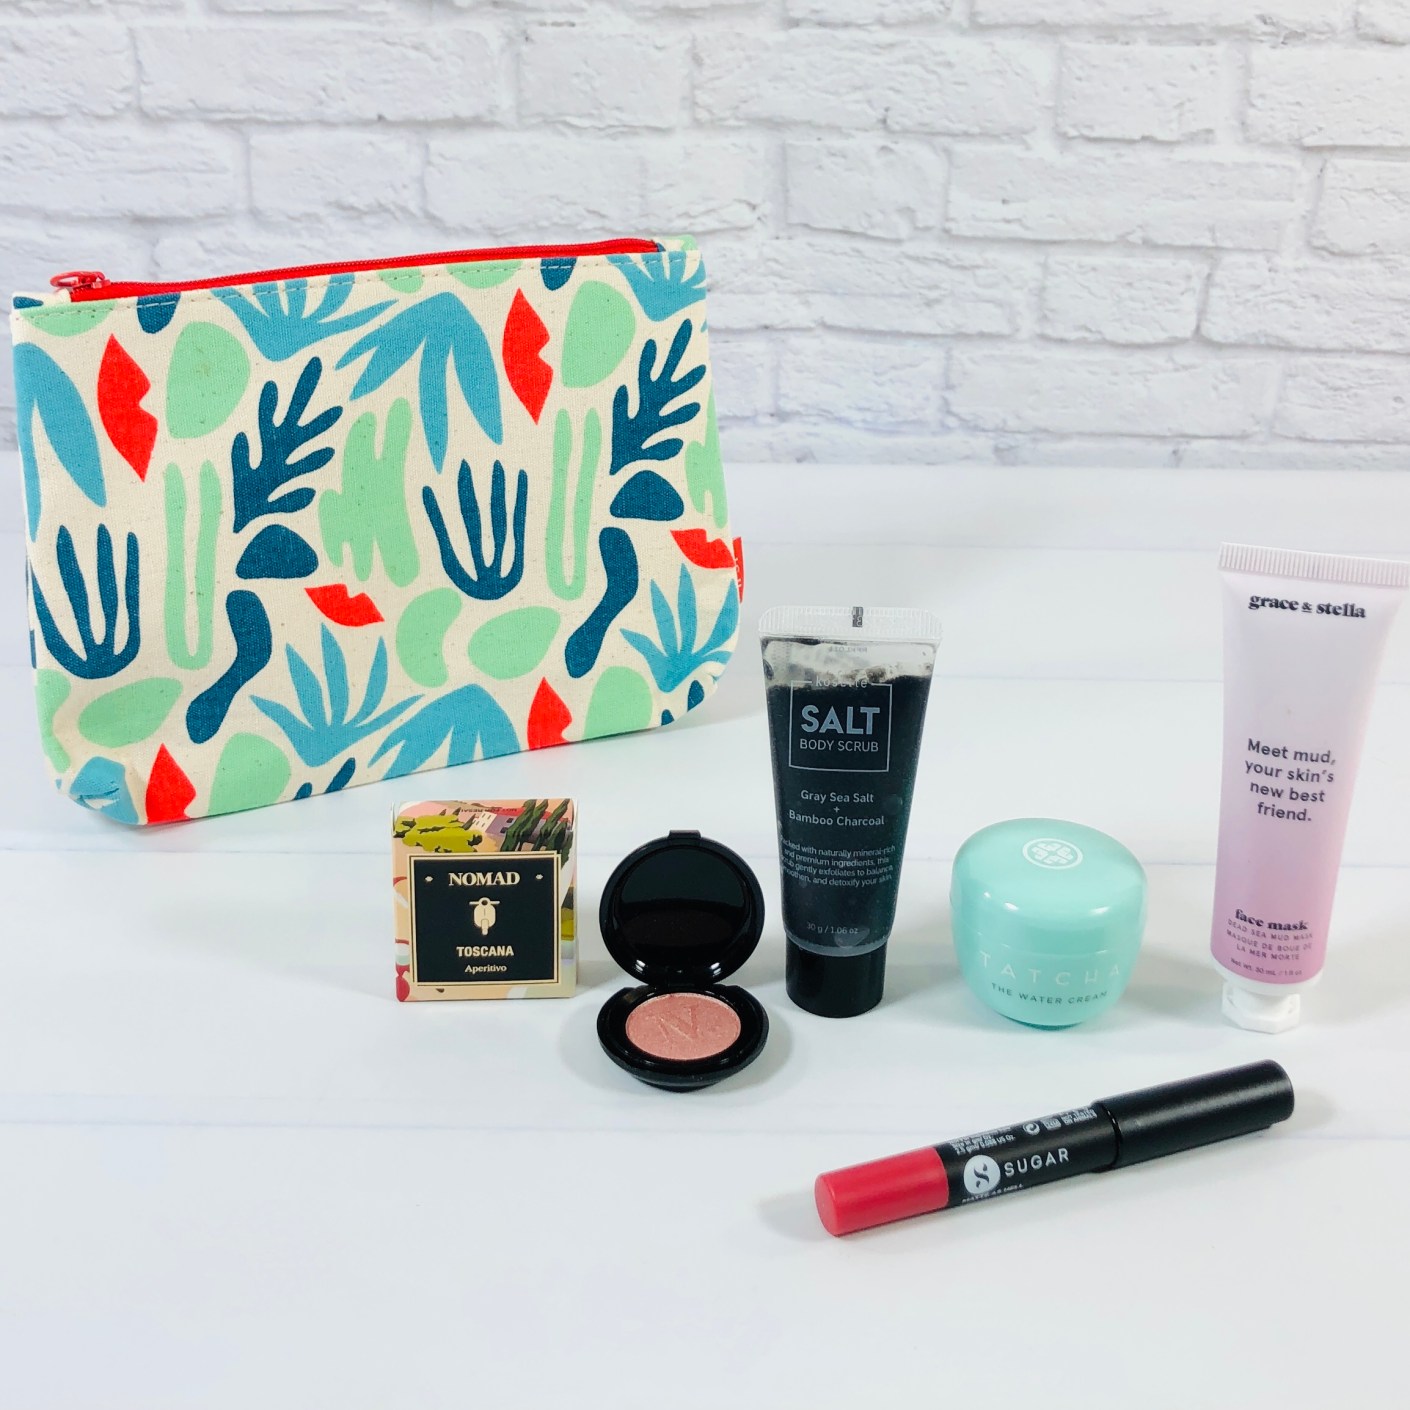 Ipsy Reviews: Get All The Details At Hello Subscription!